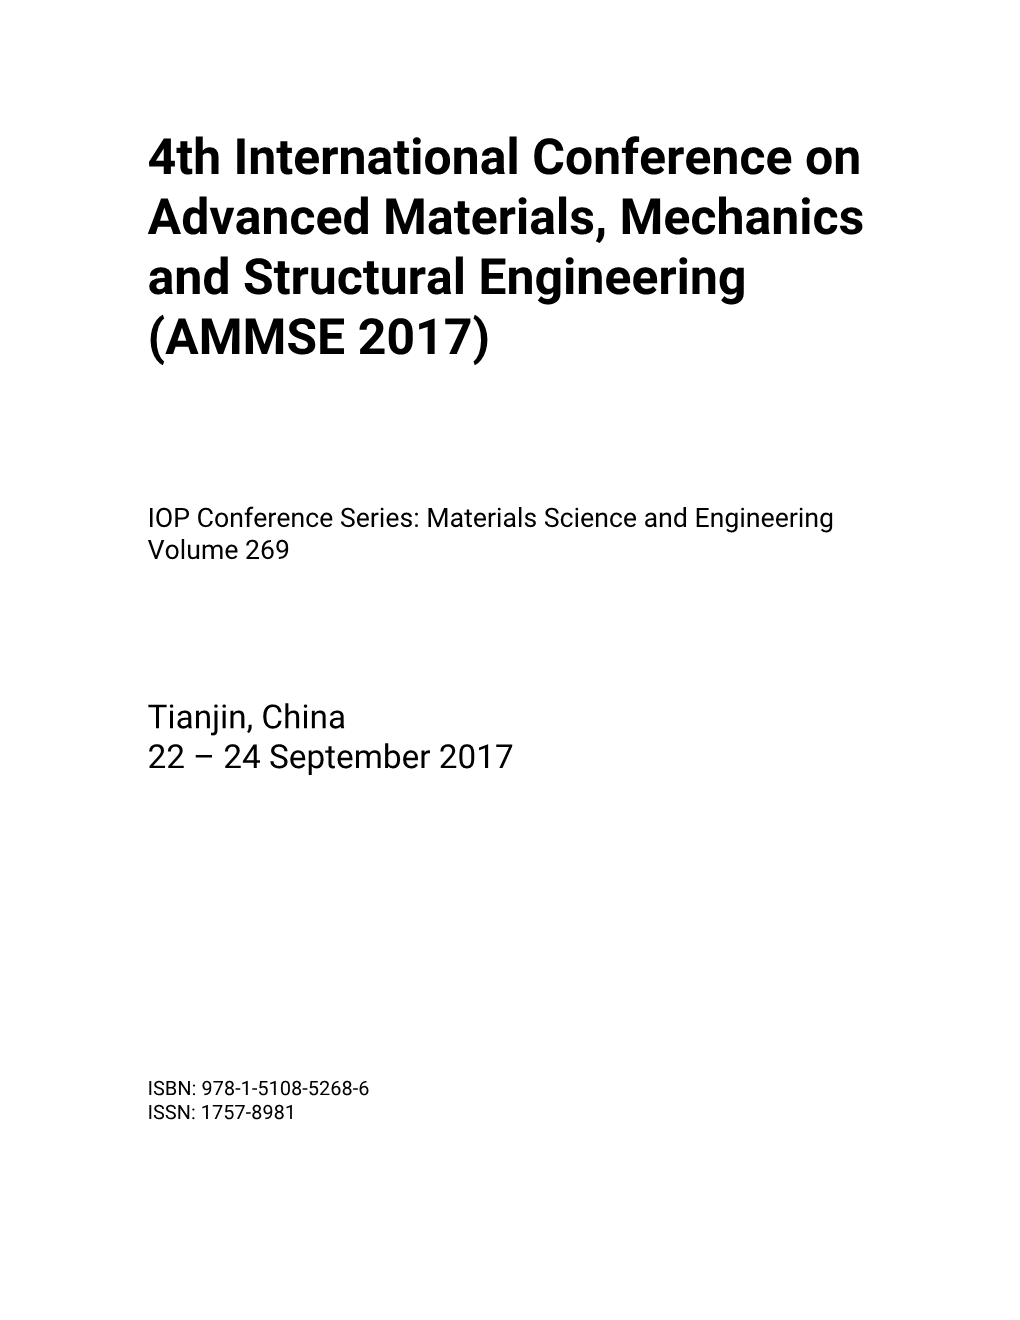 4Th International Conference on Advanced Materials, Mechanics and Structural Engineering (4Th AMMSE 2017)